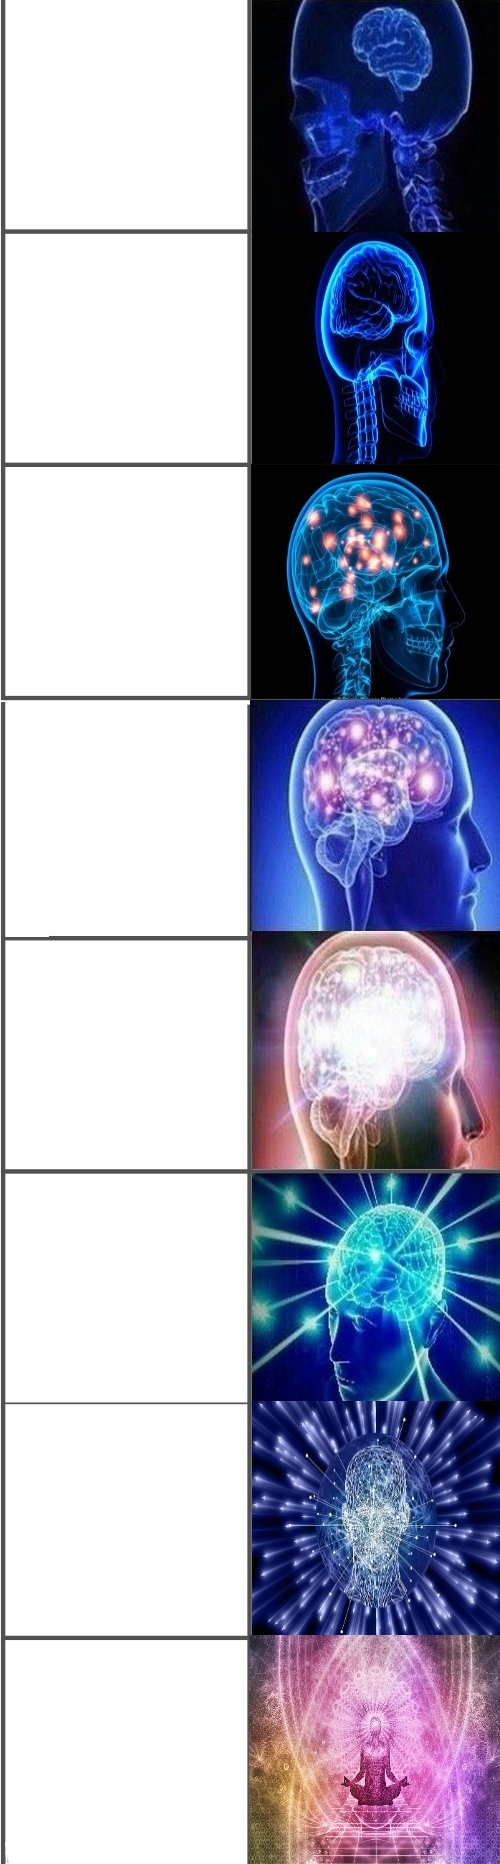 High Quality Expanding brain extended 8 panels Blank Meme Template